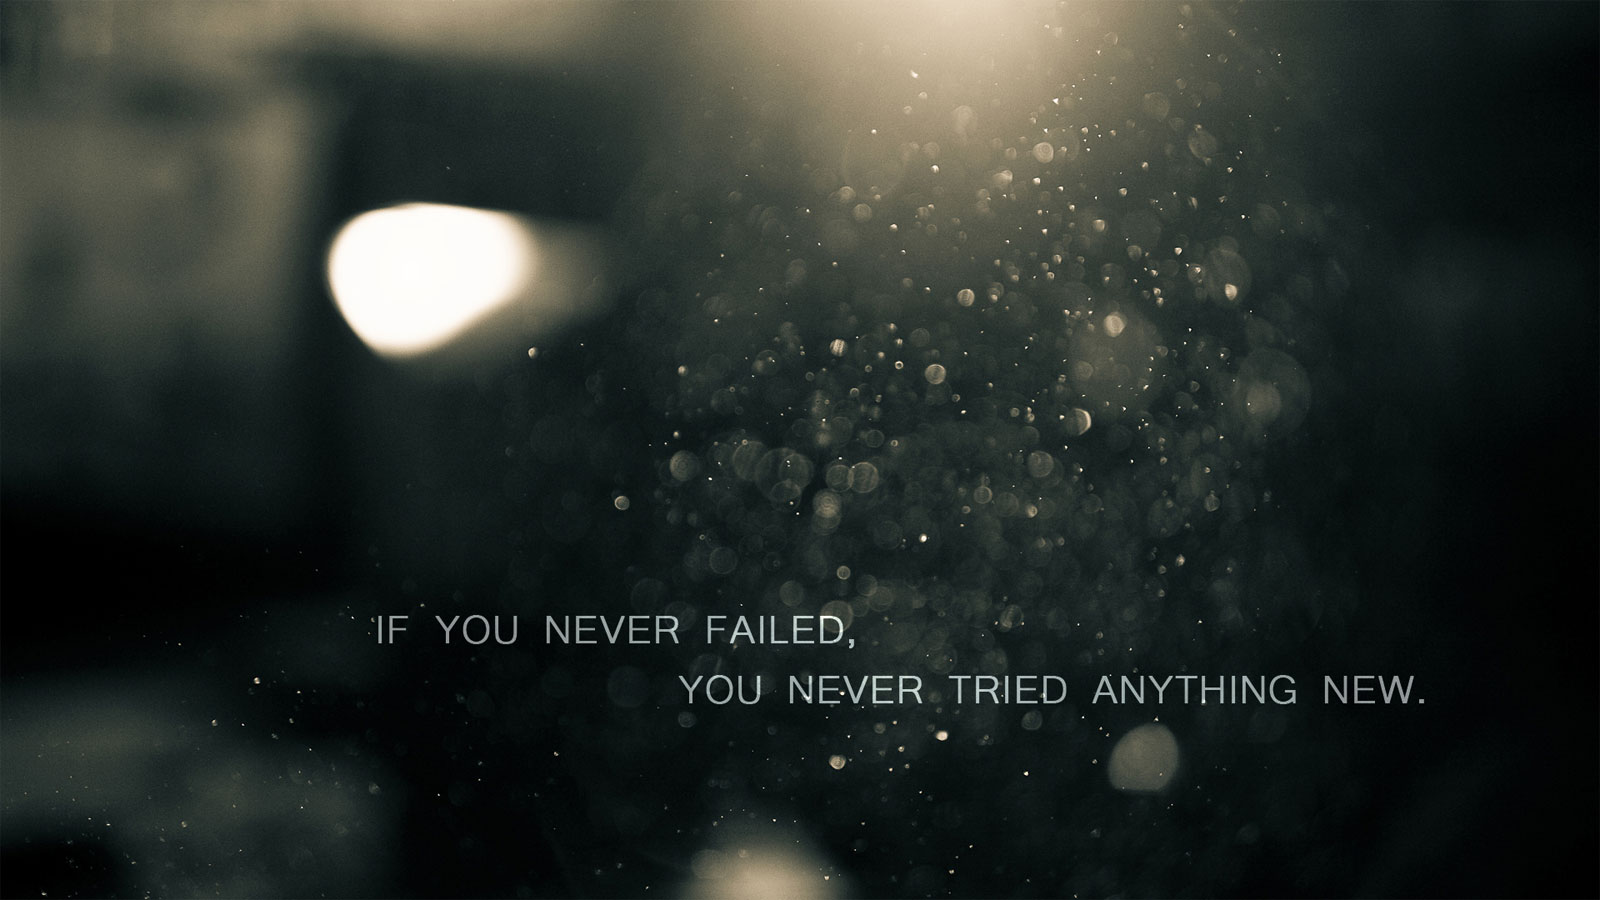 The 115 BEST Motivational Wallpapers with Inspiring Quotes